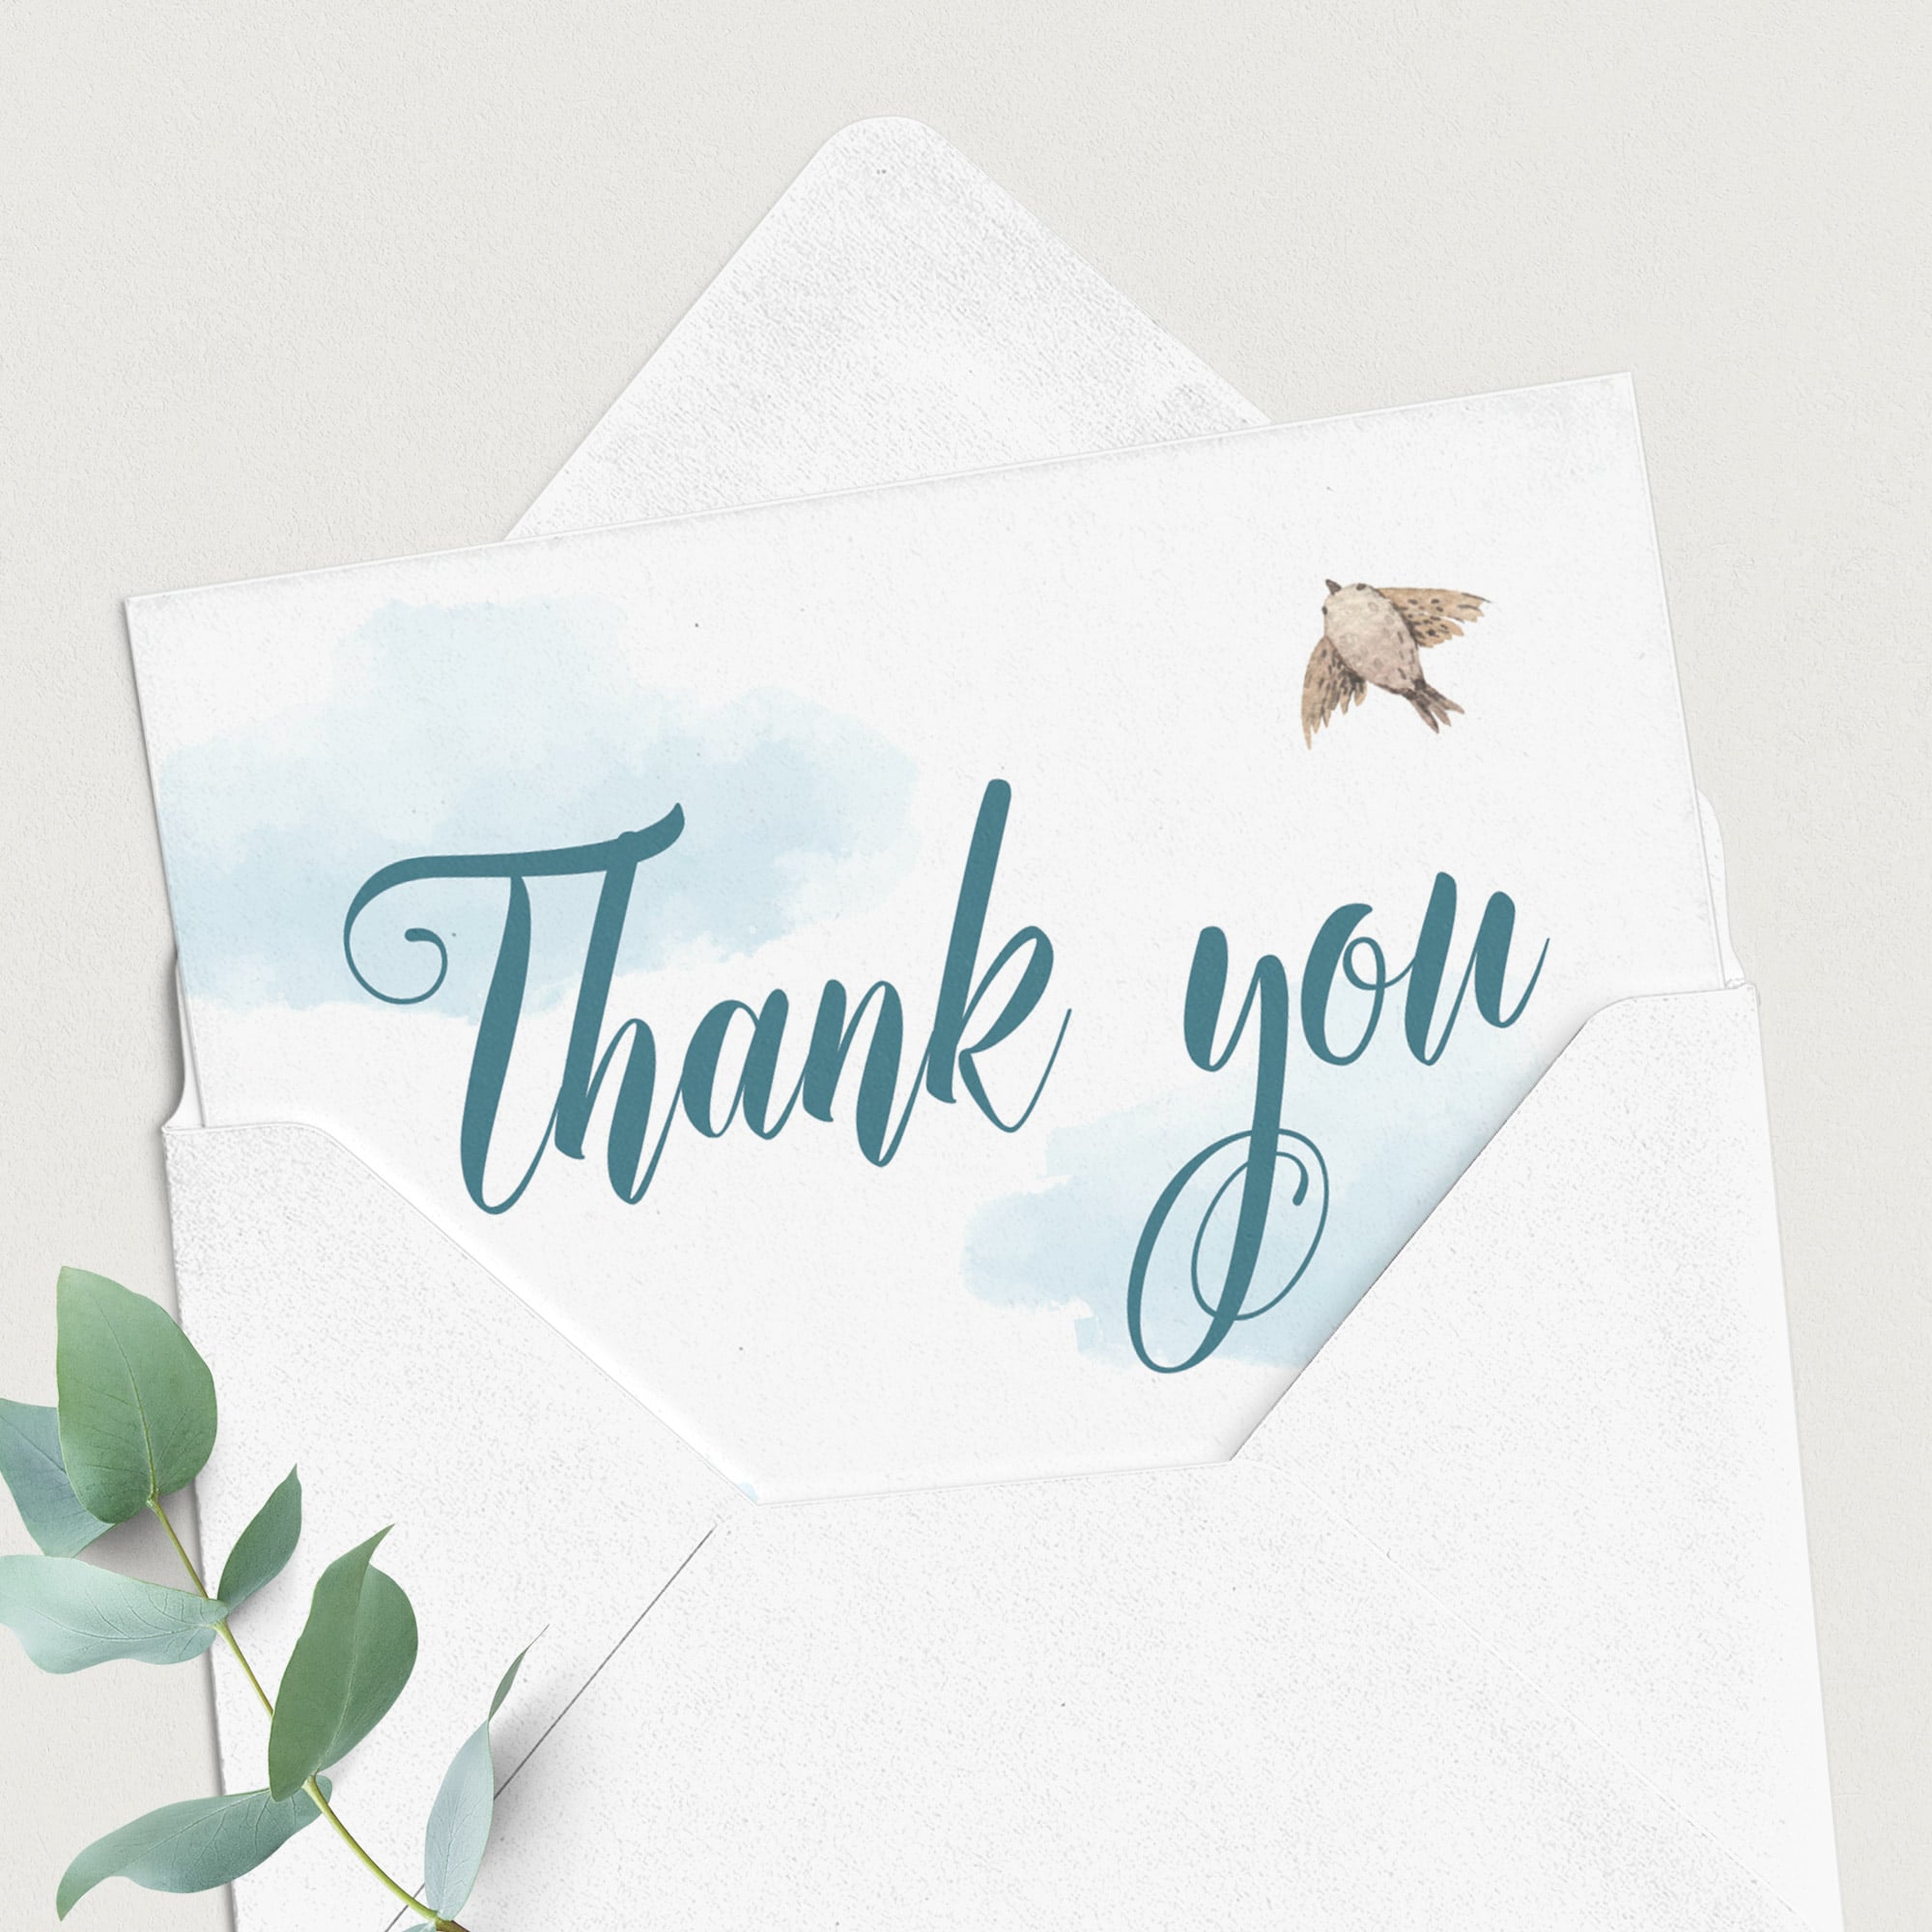 Printable up and away thank you cards by LittleSizzle